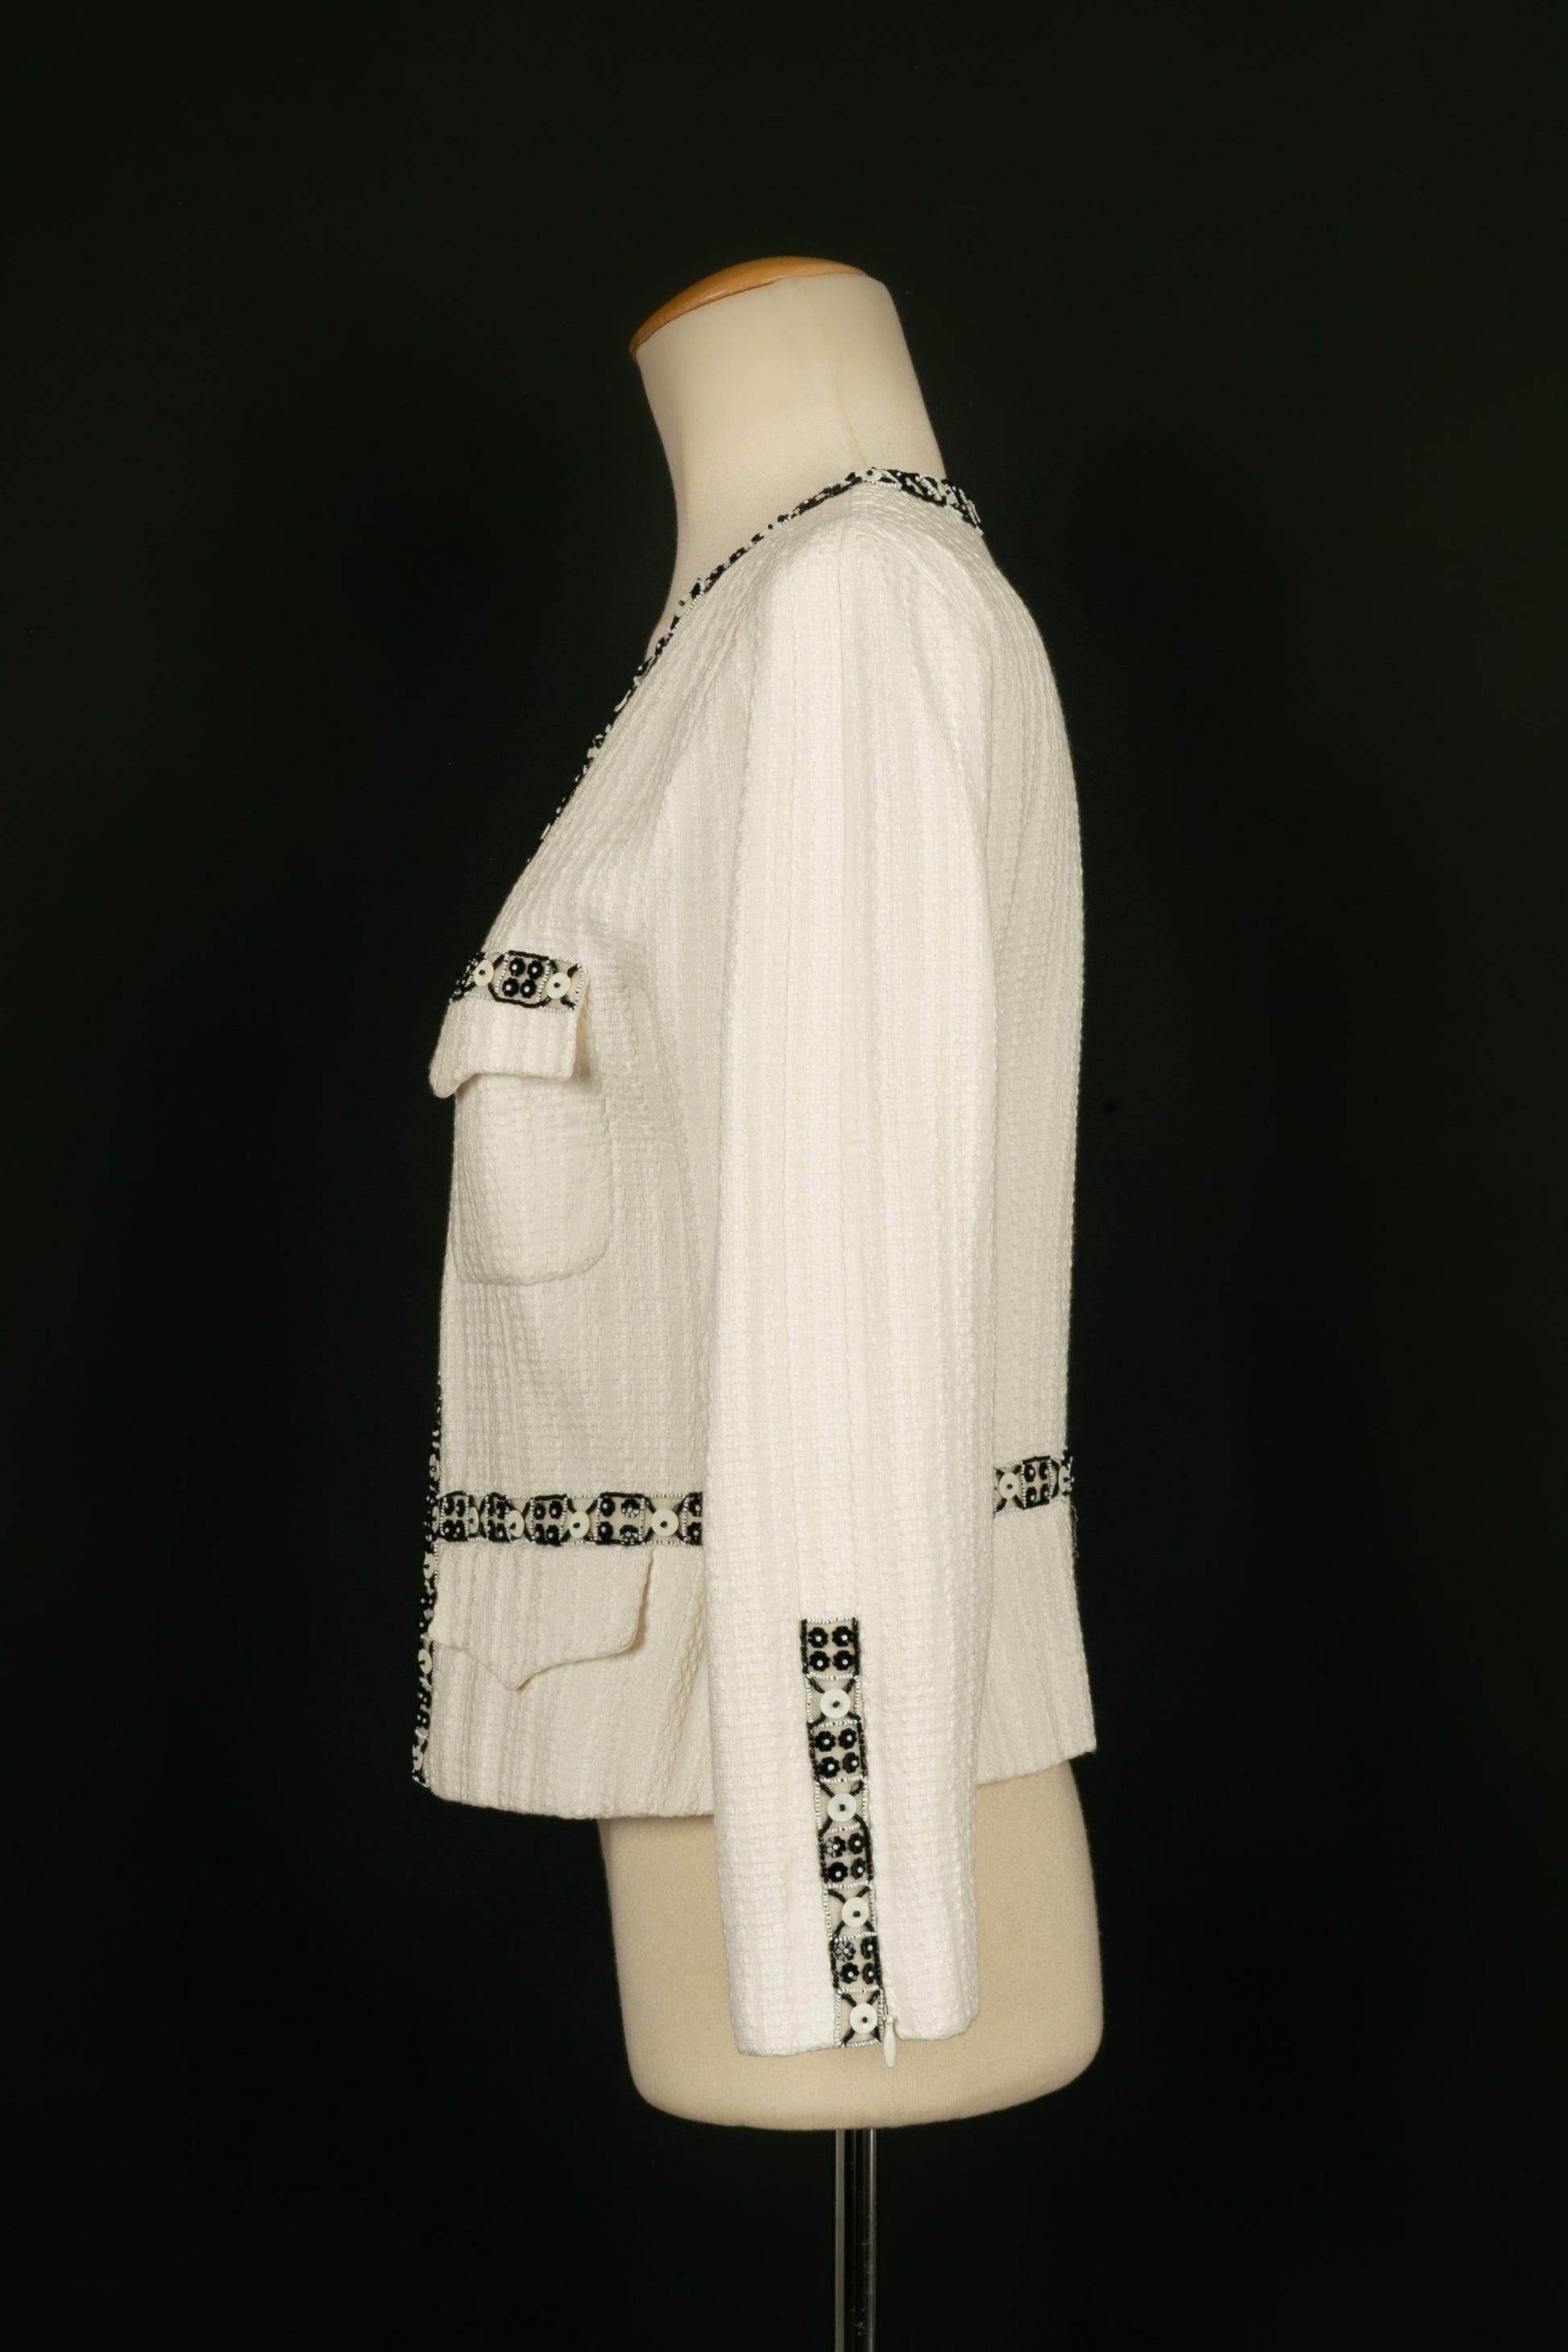 Chanel - (Made in France) White jacket in cotton and linen embroidered with pearls and sequins. Silk lining. Size 42FR. Spring/Summer 2003 Collection. To be noted, underarm stains.

Additional information:
Condition: Good condition
Dimensions: